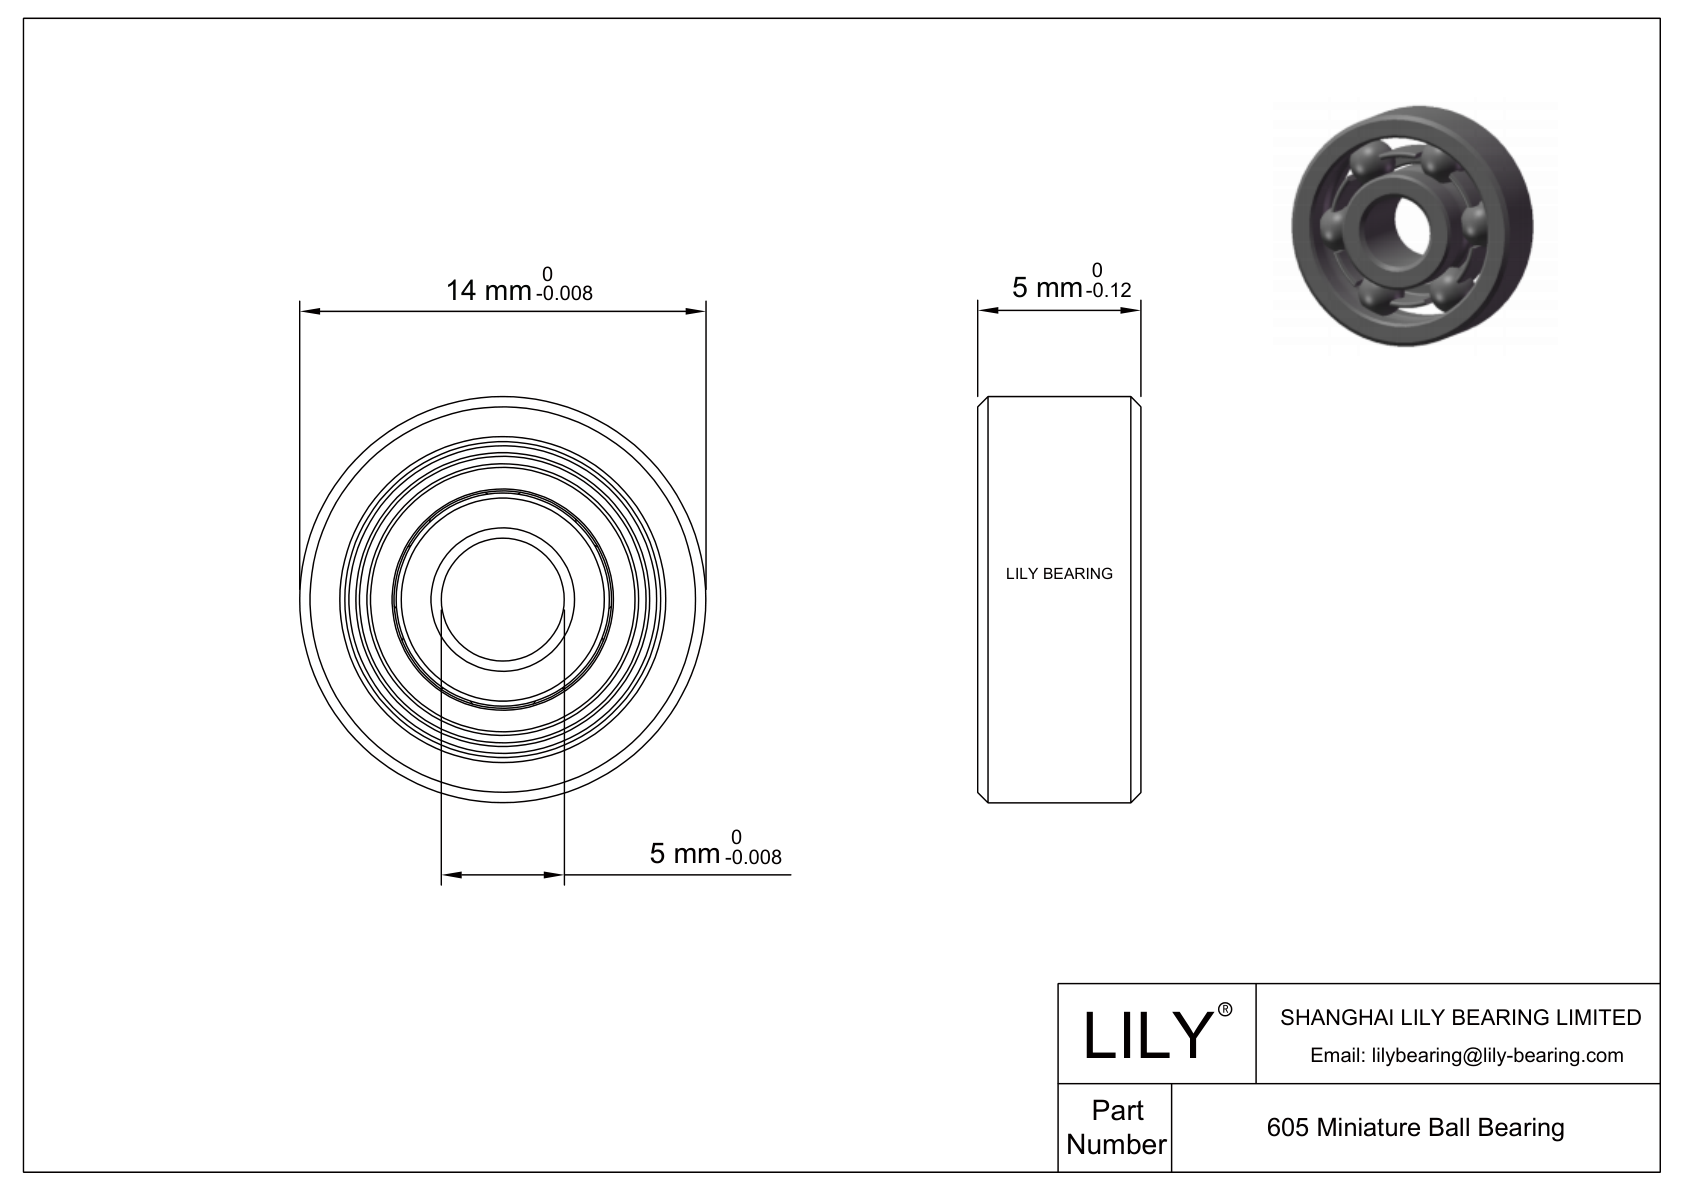 LILY-PU60519-7C1L6M5 Polyurethane Coated Bearing With Screw cad drawing